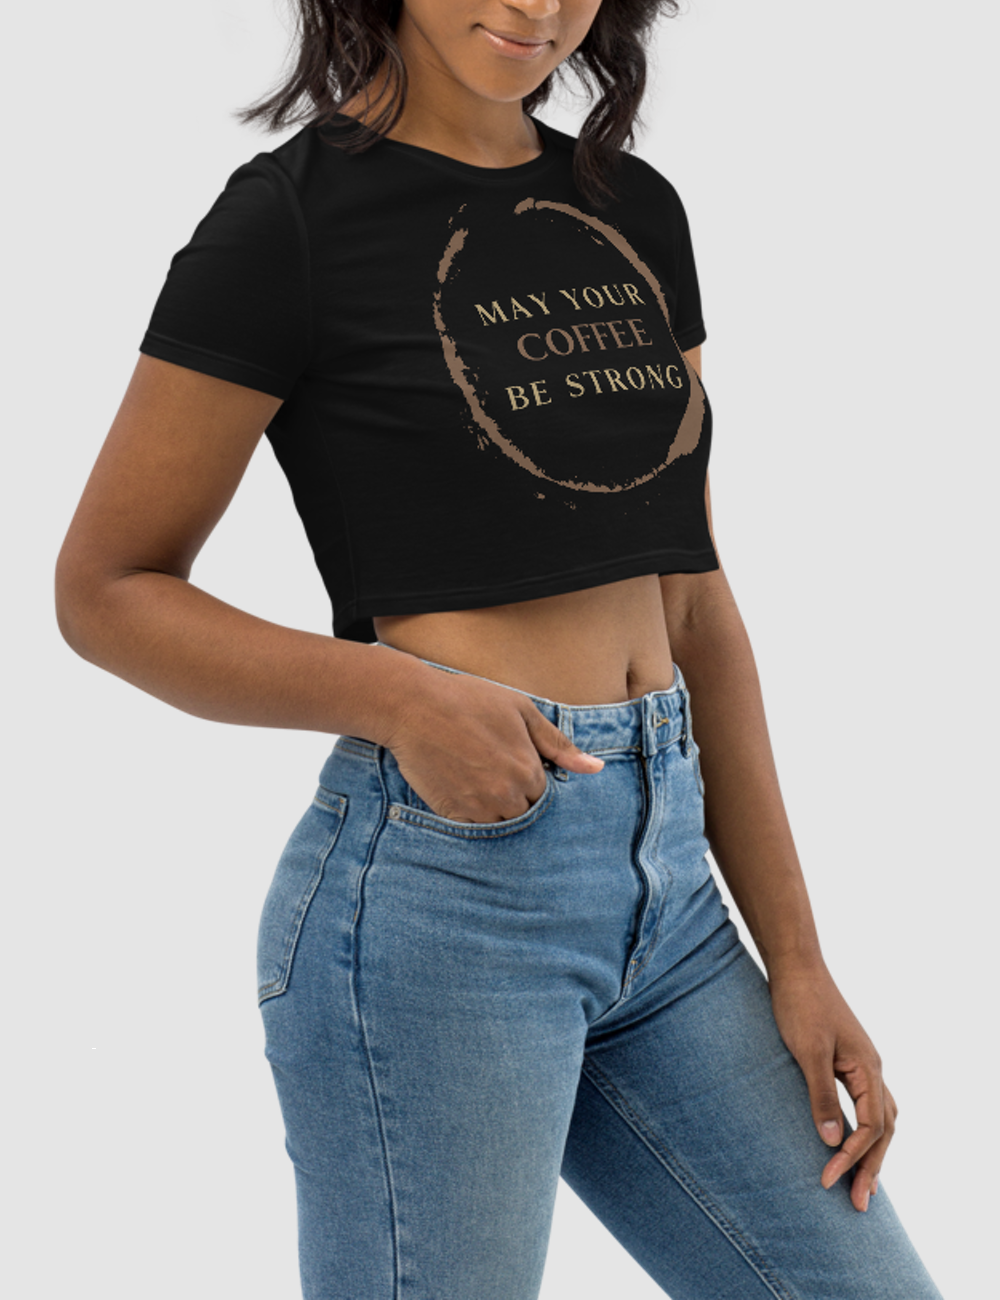 May Your Coffee Be Strong Women's Fitted Crop Top T-Shirt OniTakai